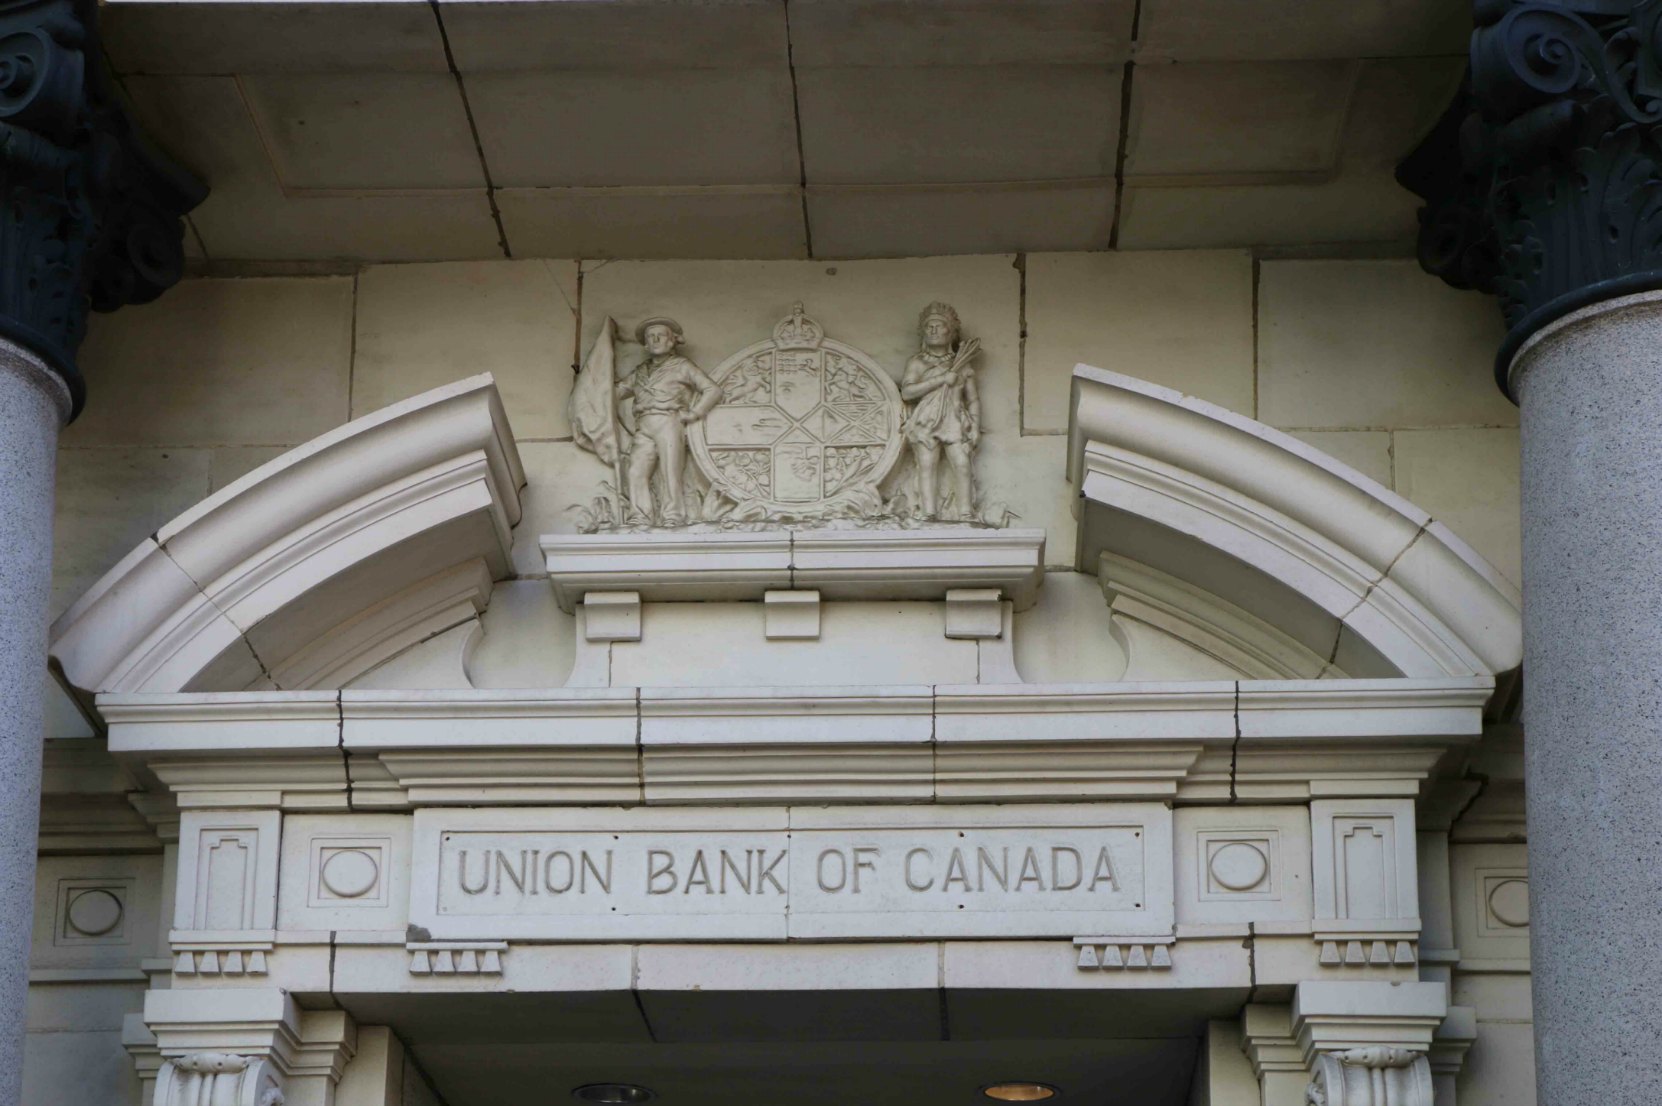 The Union Bank of Canada no longer exists but its sign and corporate coat of arms is still in place on 1205 Government Street